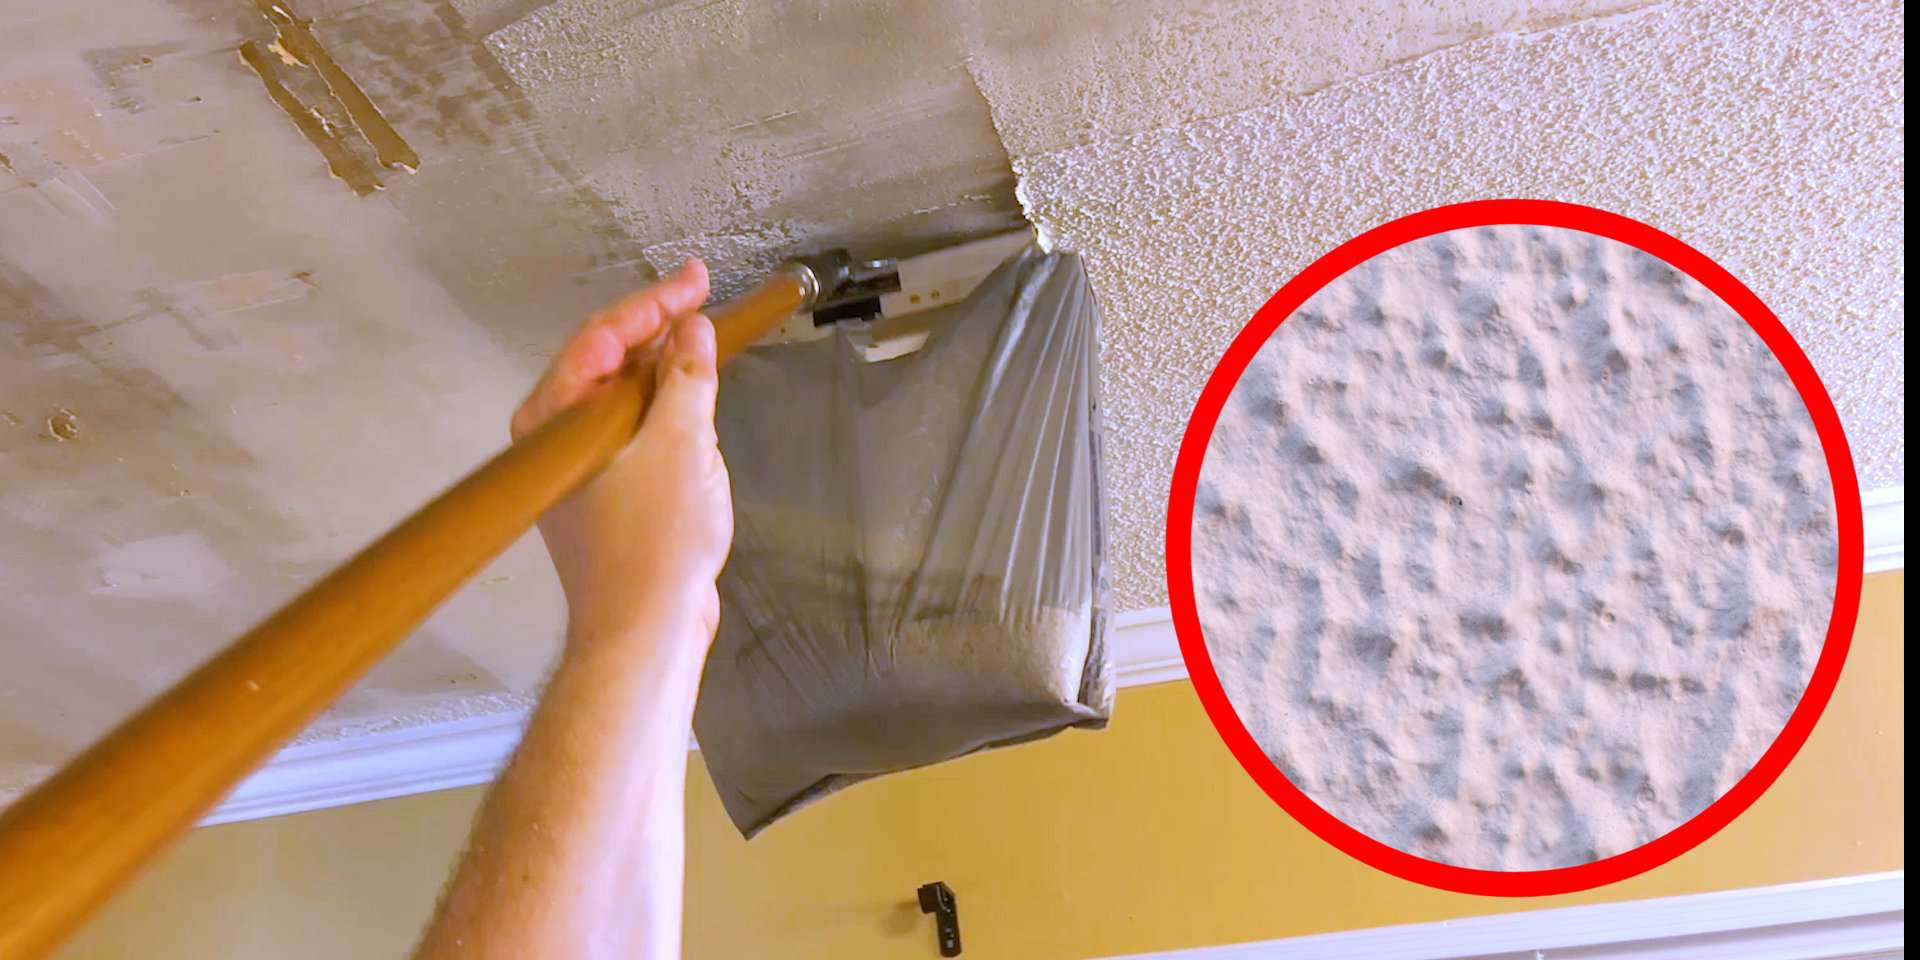 Taboola Ad Example 64600 - Realtors Tout Home Listings Without Popcorn Ceilings. Here's How To Get Rid Of The Outdated Eyesore If It's In Your Home.